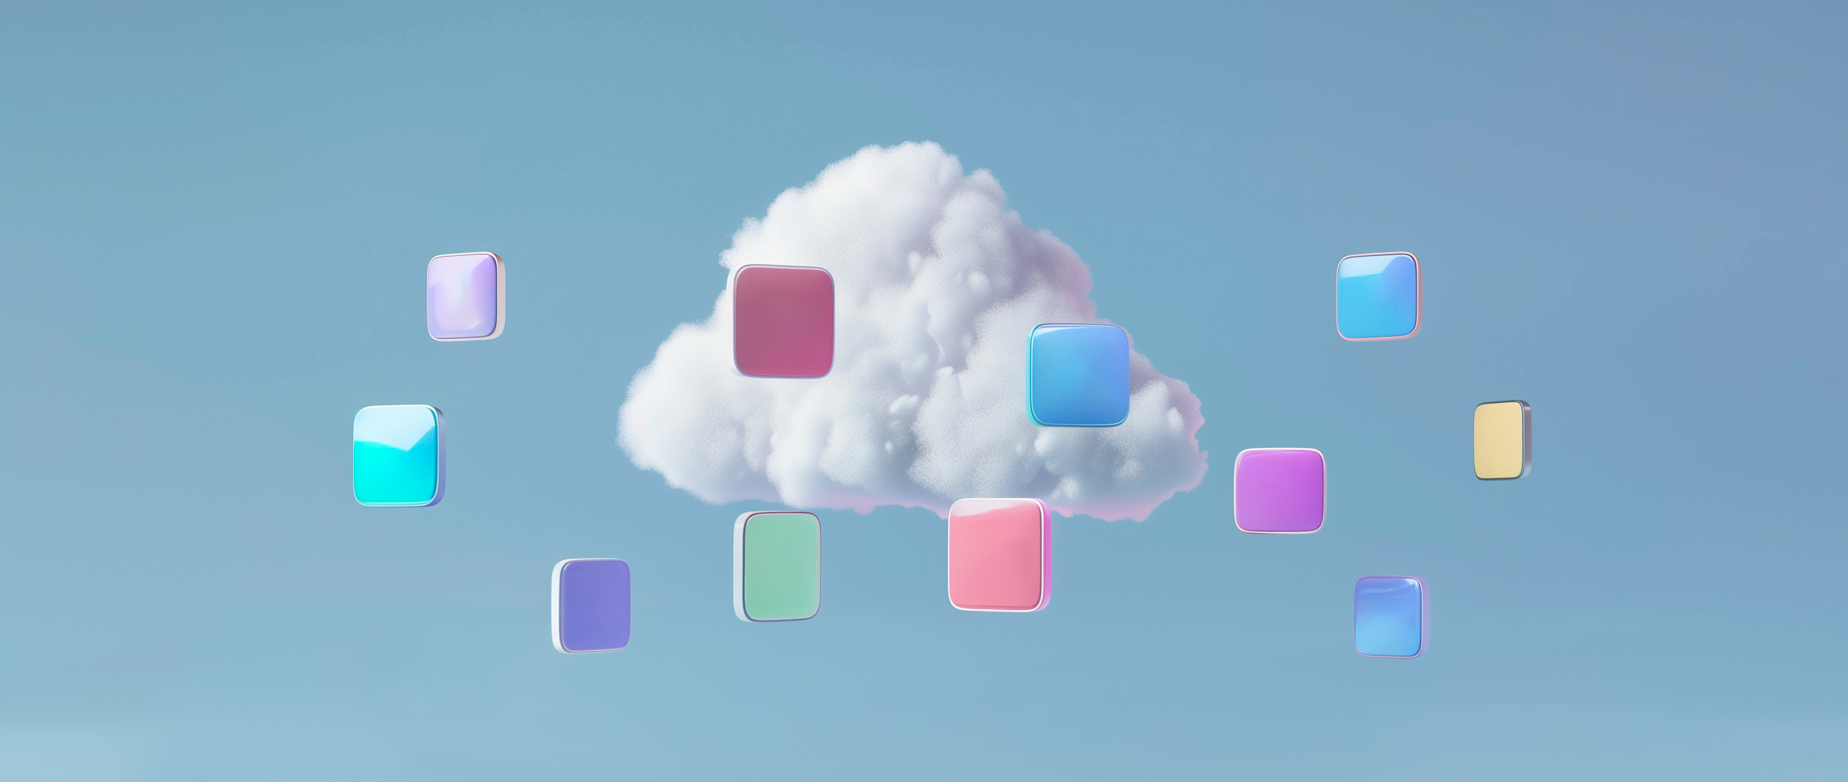 A cloud with multicolored squares floating around it on a blue background.